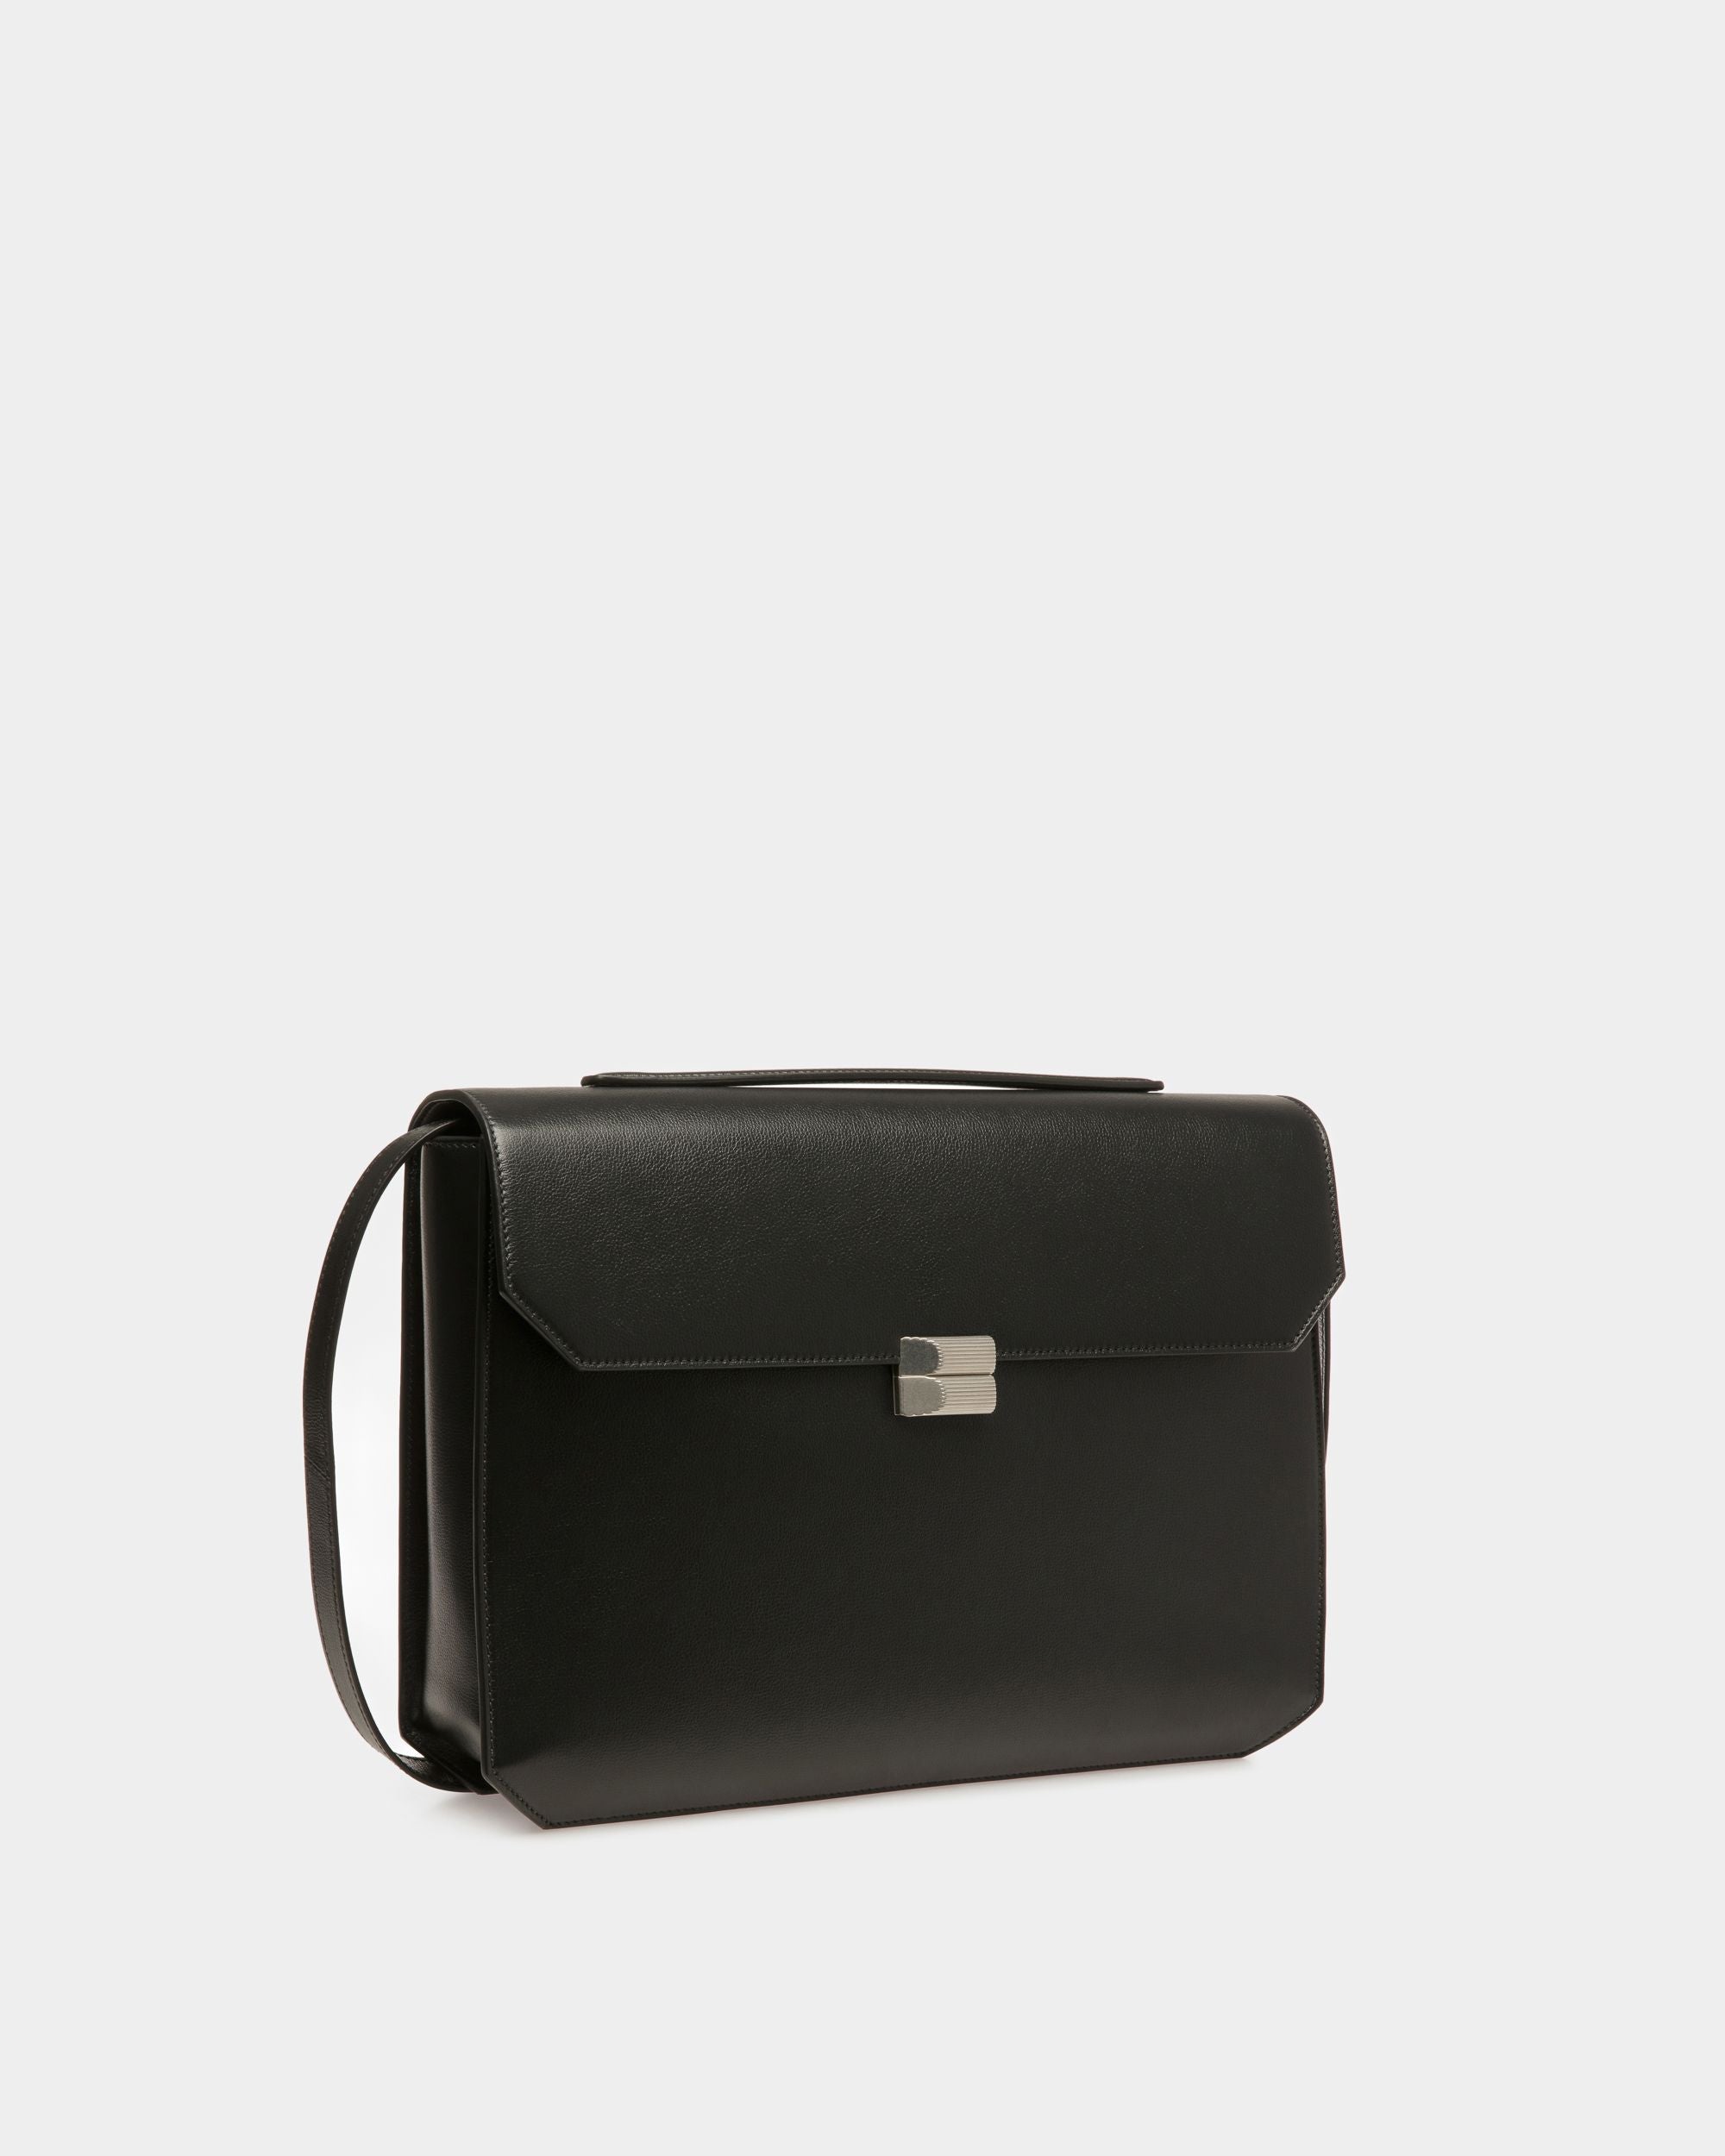 Packed | Men's Business Bag | Black Leather | Bally | Still Life 3/4 Front